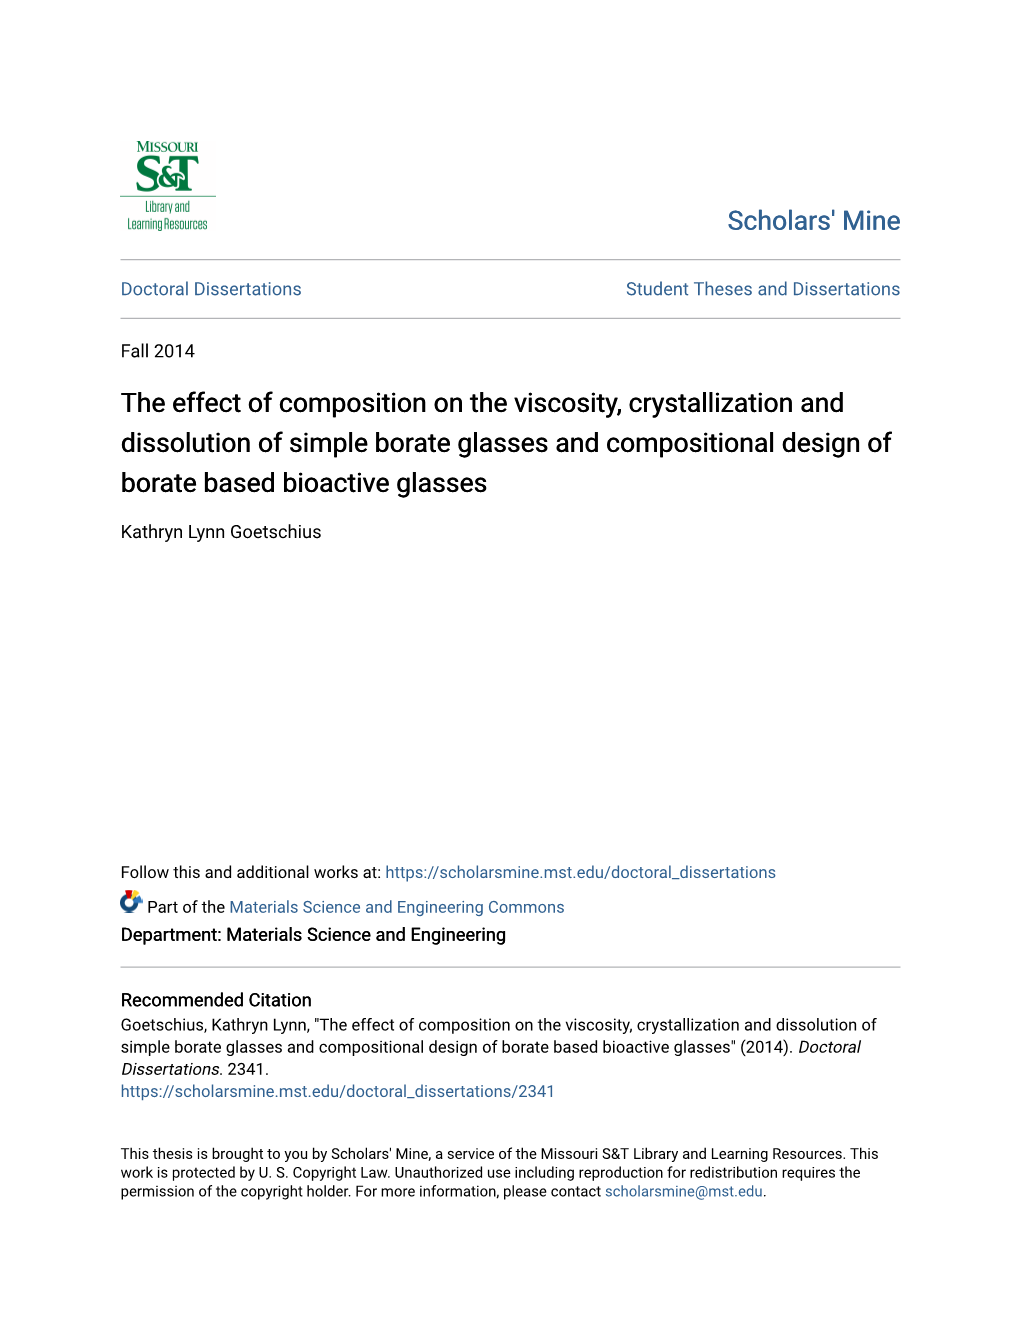 The Effect of Composition on the Viscosity, Crystallization and Dissolution of Simple Borate Glasses and Compositional Design of Borate Based Bioactive Glasses